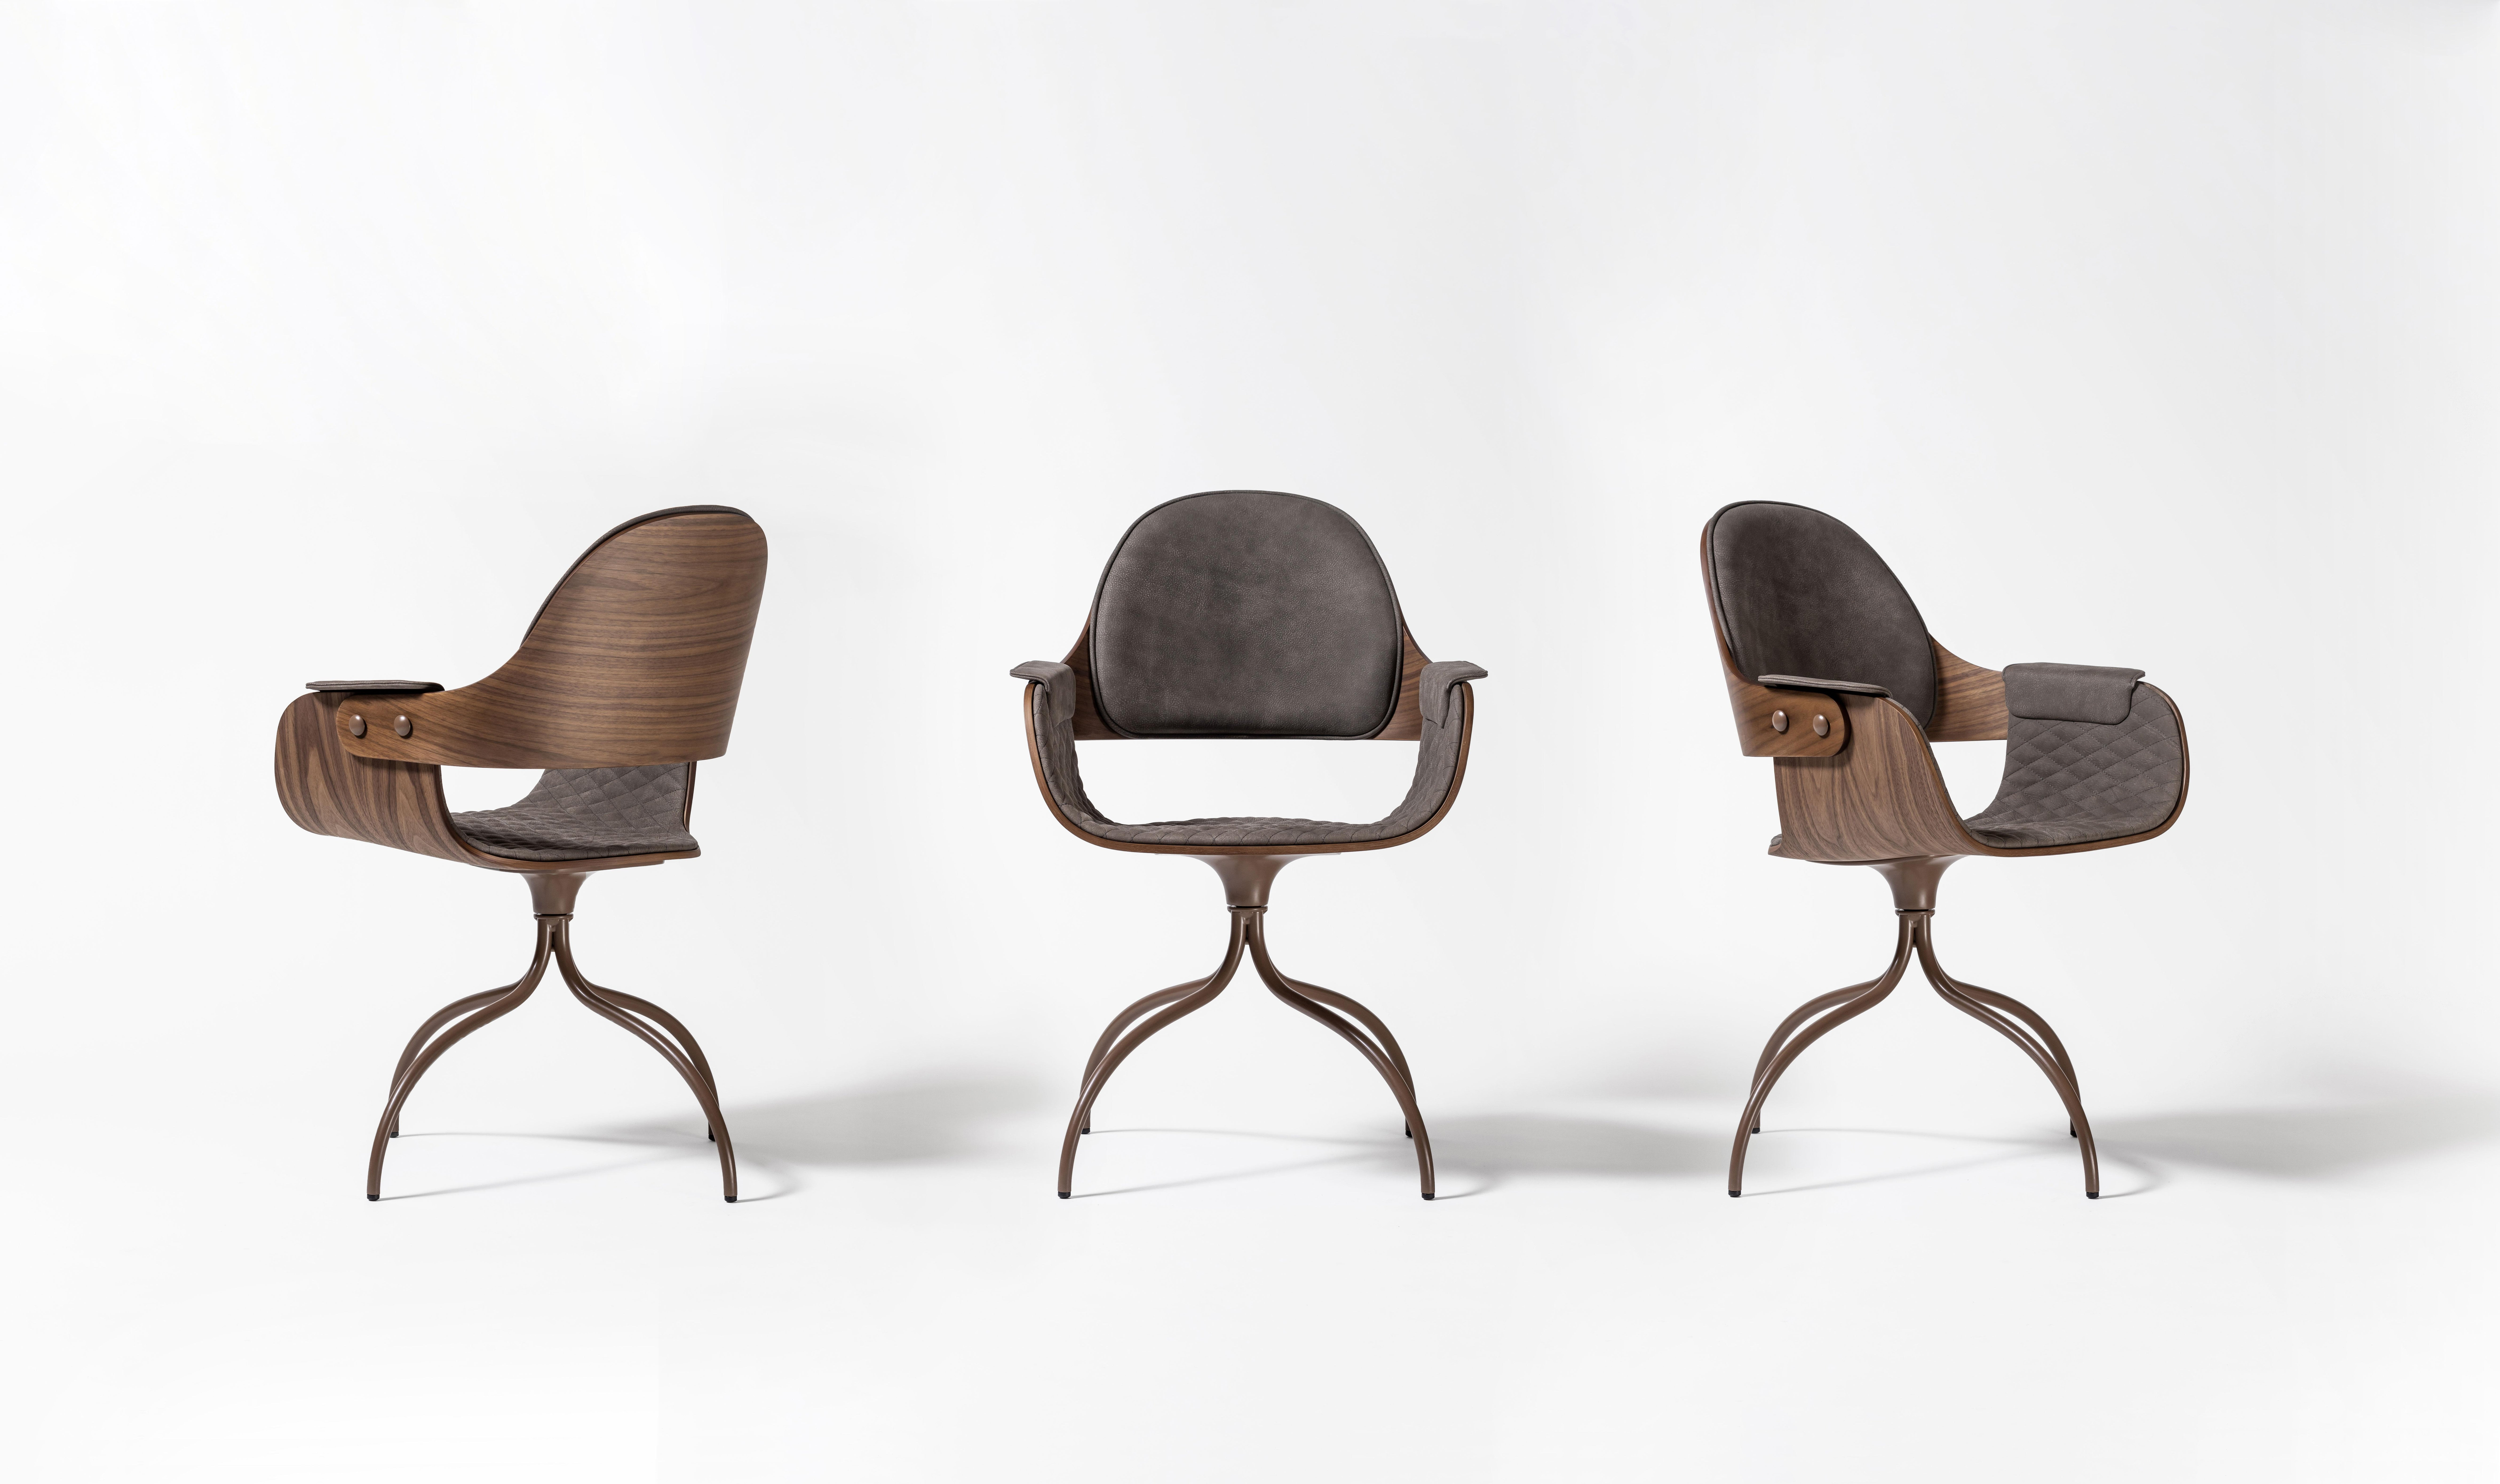 Set of 3 Swivel Showtime chair by Jaime Hayon 
Dimensions: D 65 x W 55 x H 86 cm 
Materials: Powder coated steel or aluminium structure. Legs, seat and backrest in plywood with exteriors in natural ash, walnut or ash stained black. Metallic